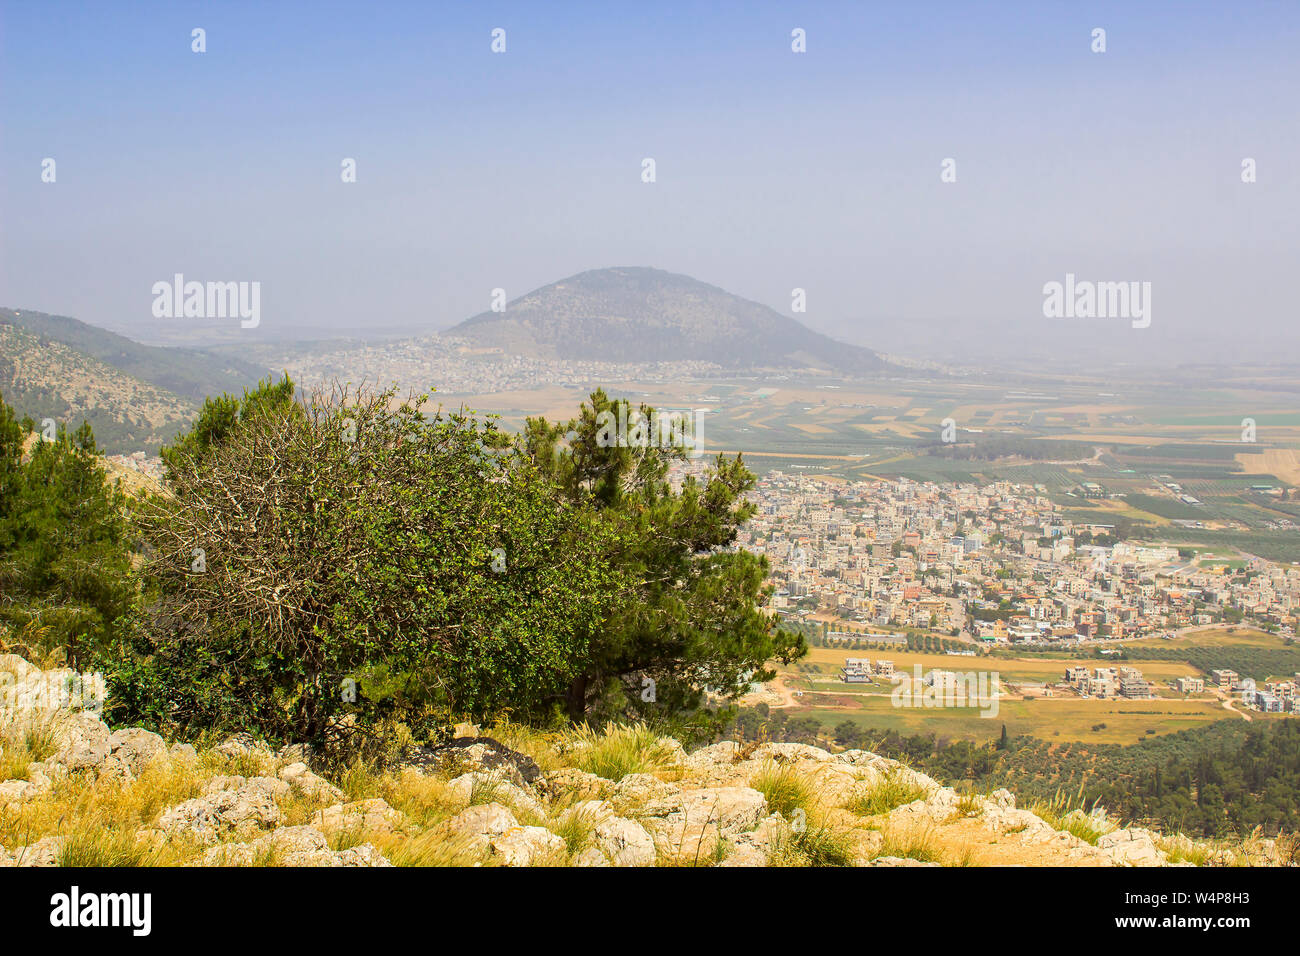 5 May 2018 A view of Mount Tabor in Israel from the mount Precipice. tradition has this as the place where an angry mob would have cast Jesus Christ o Stock Photo